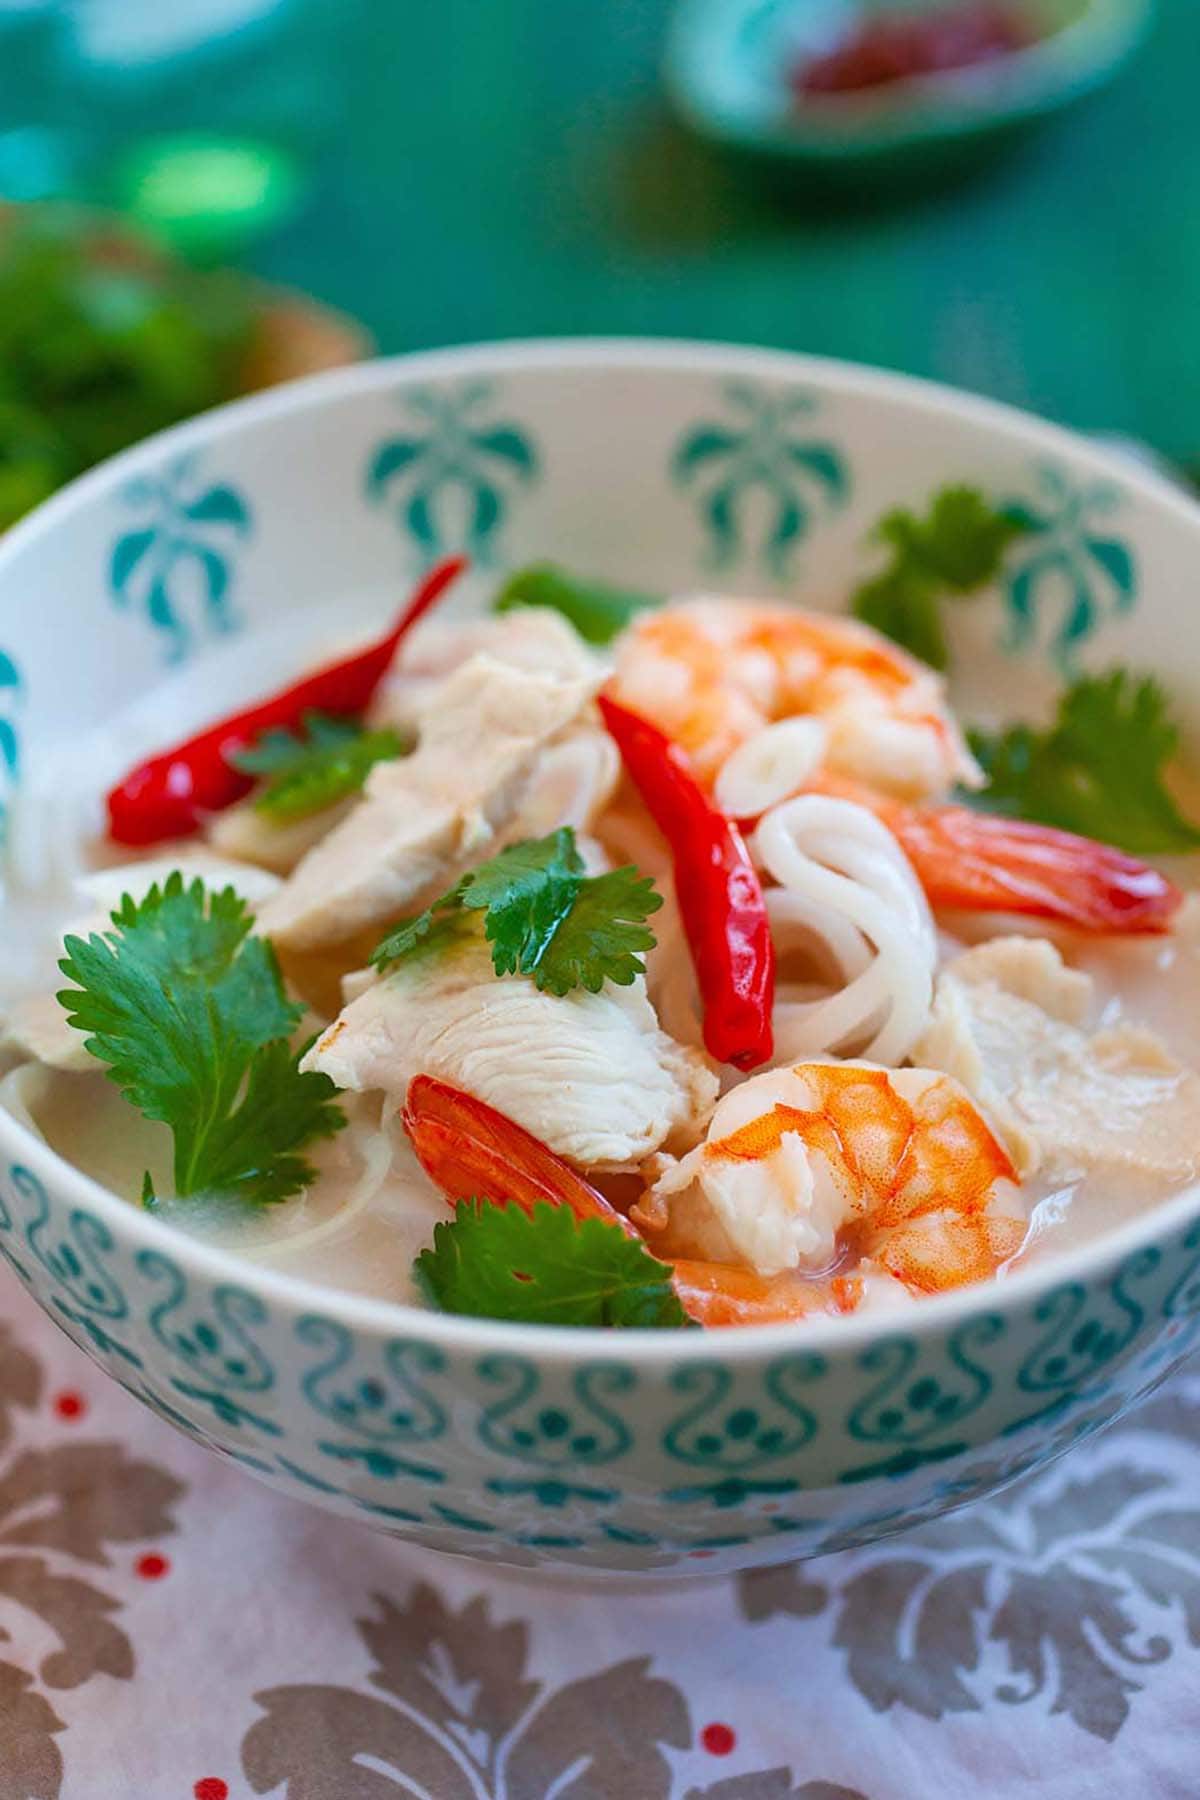 Rich and tasty homemade Thai coconut lime noodle soup with shrimps ready to serve.